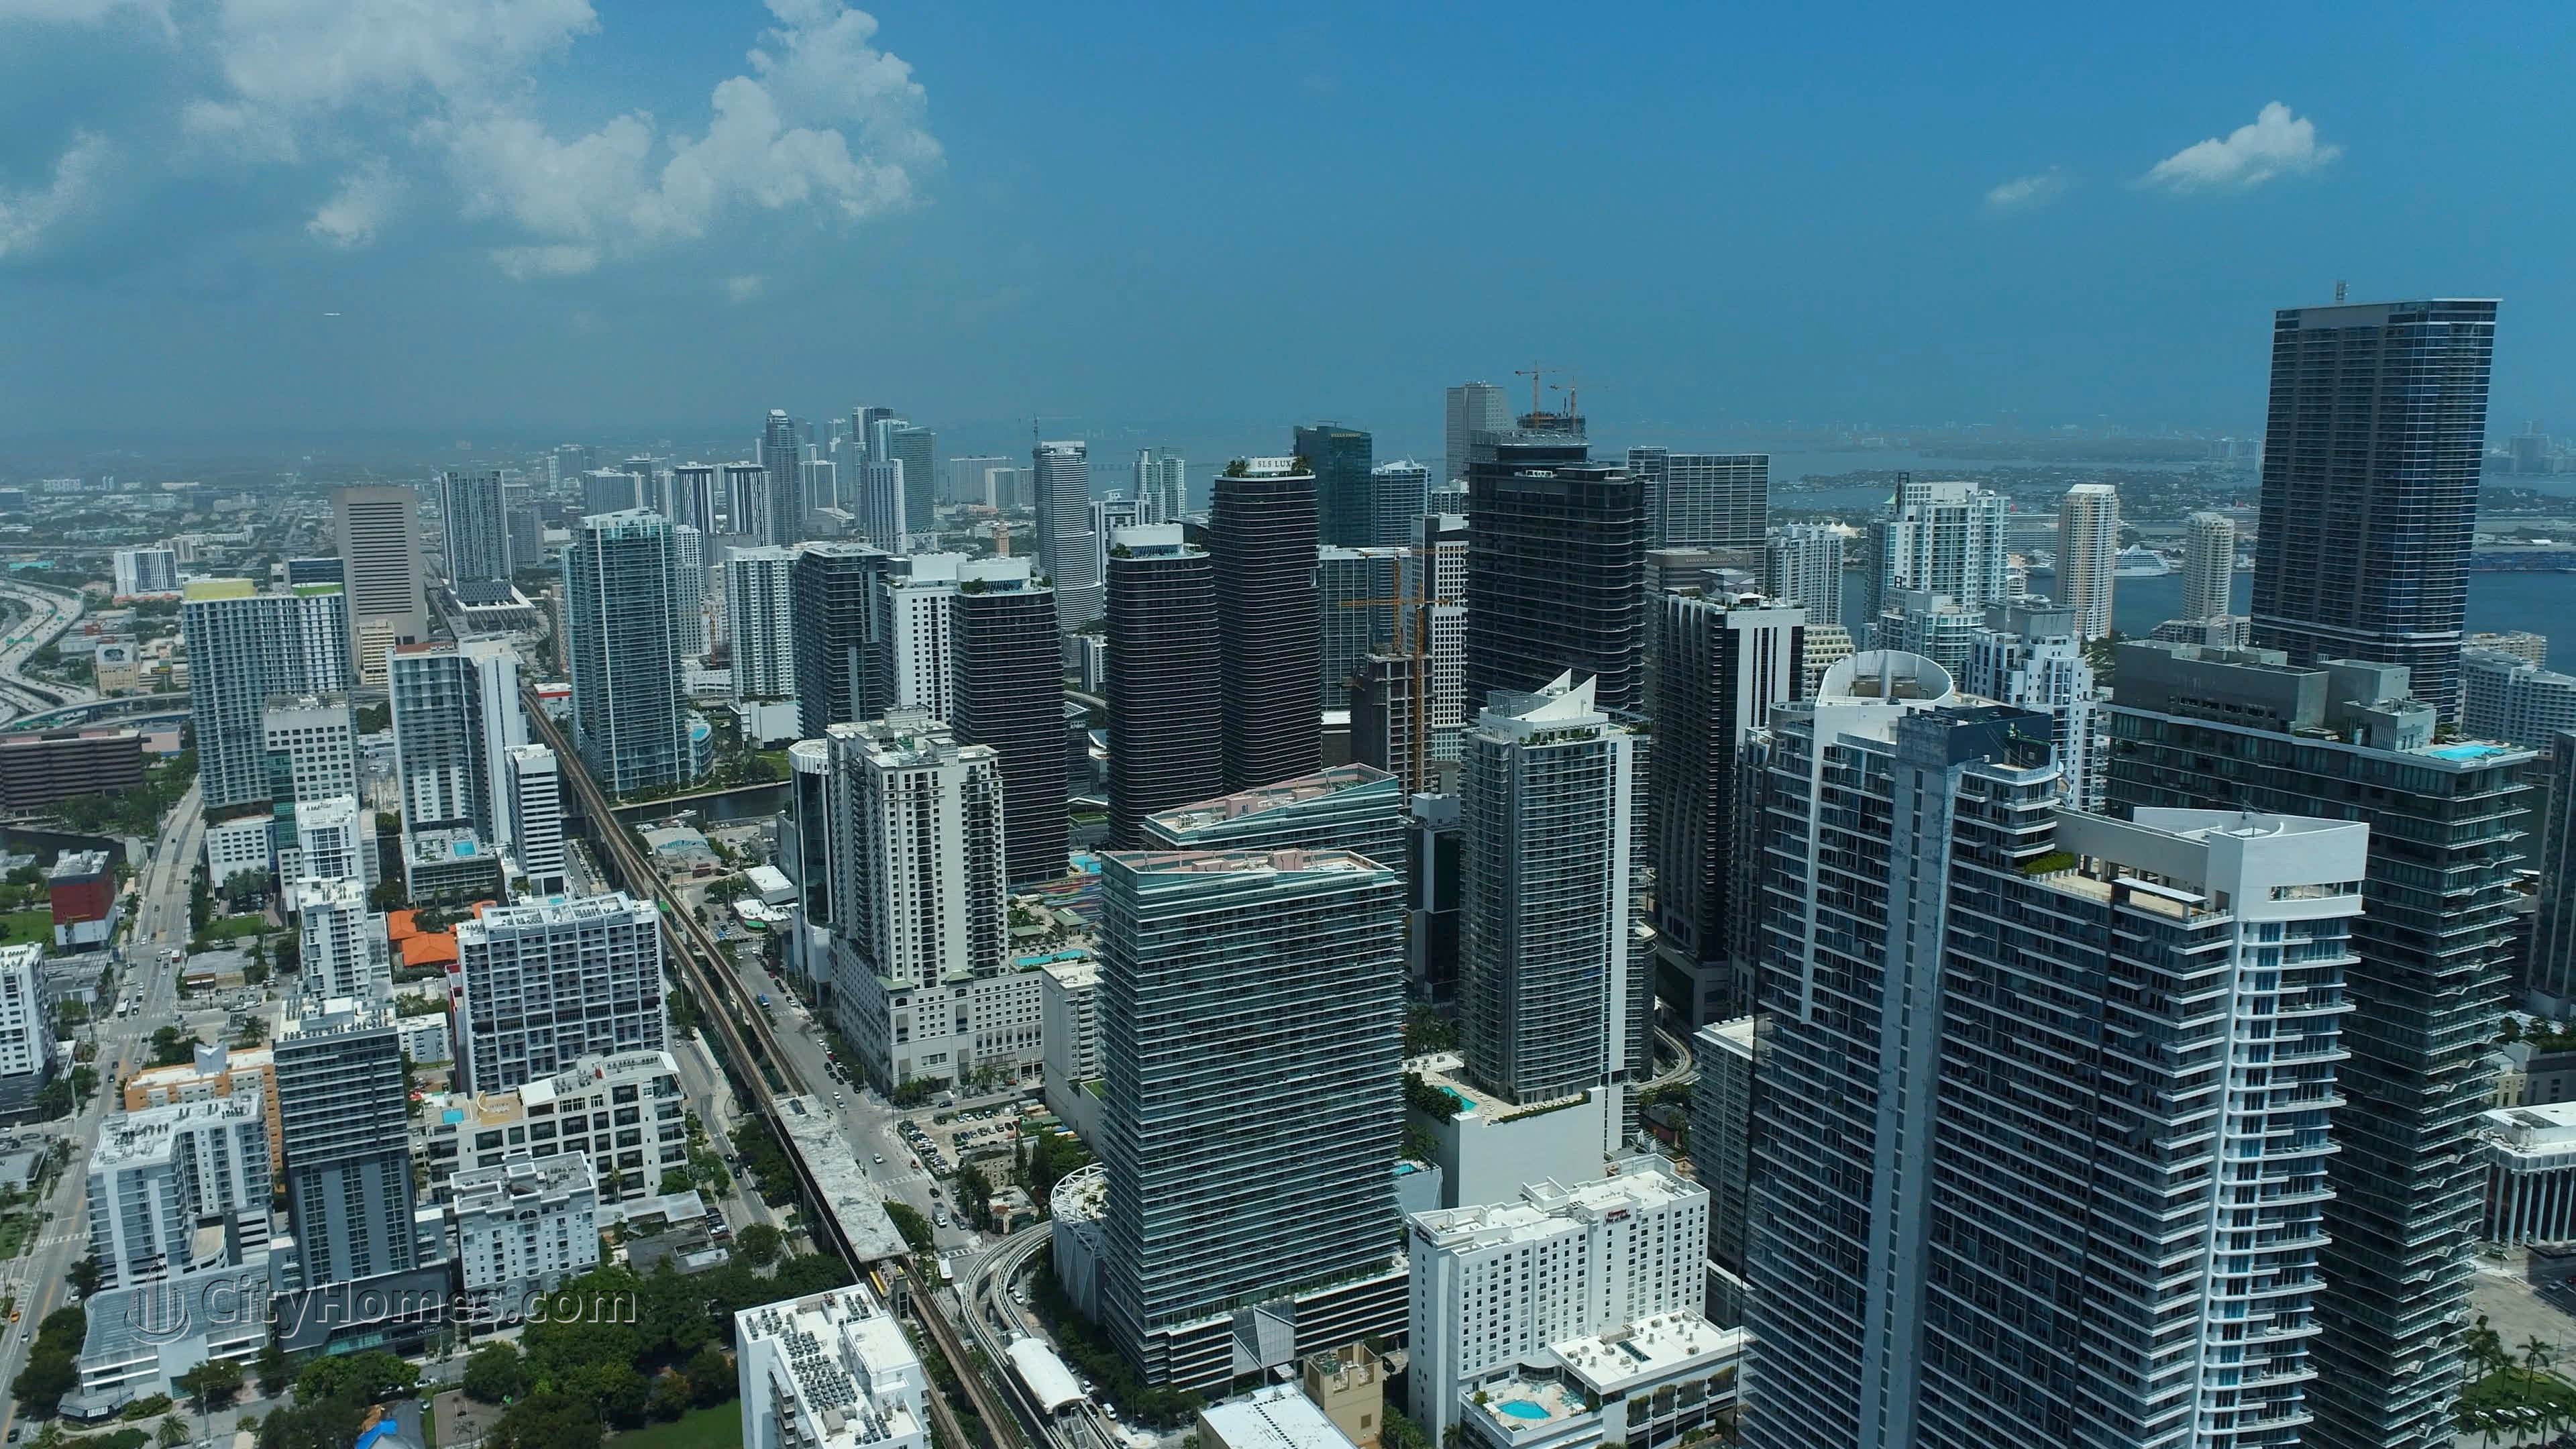 6. 79 SW 12th Street, Brickell, Miami, FL 33130에 Axis - South Tower 건물